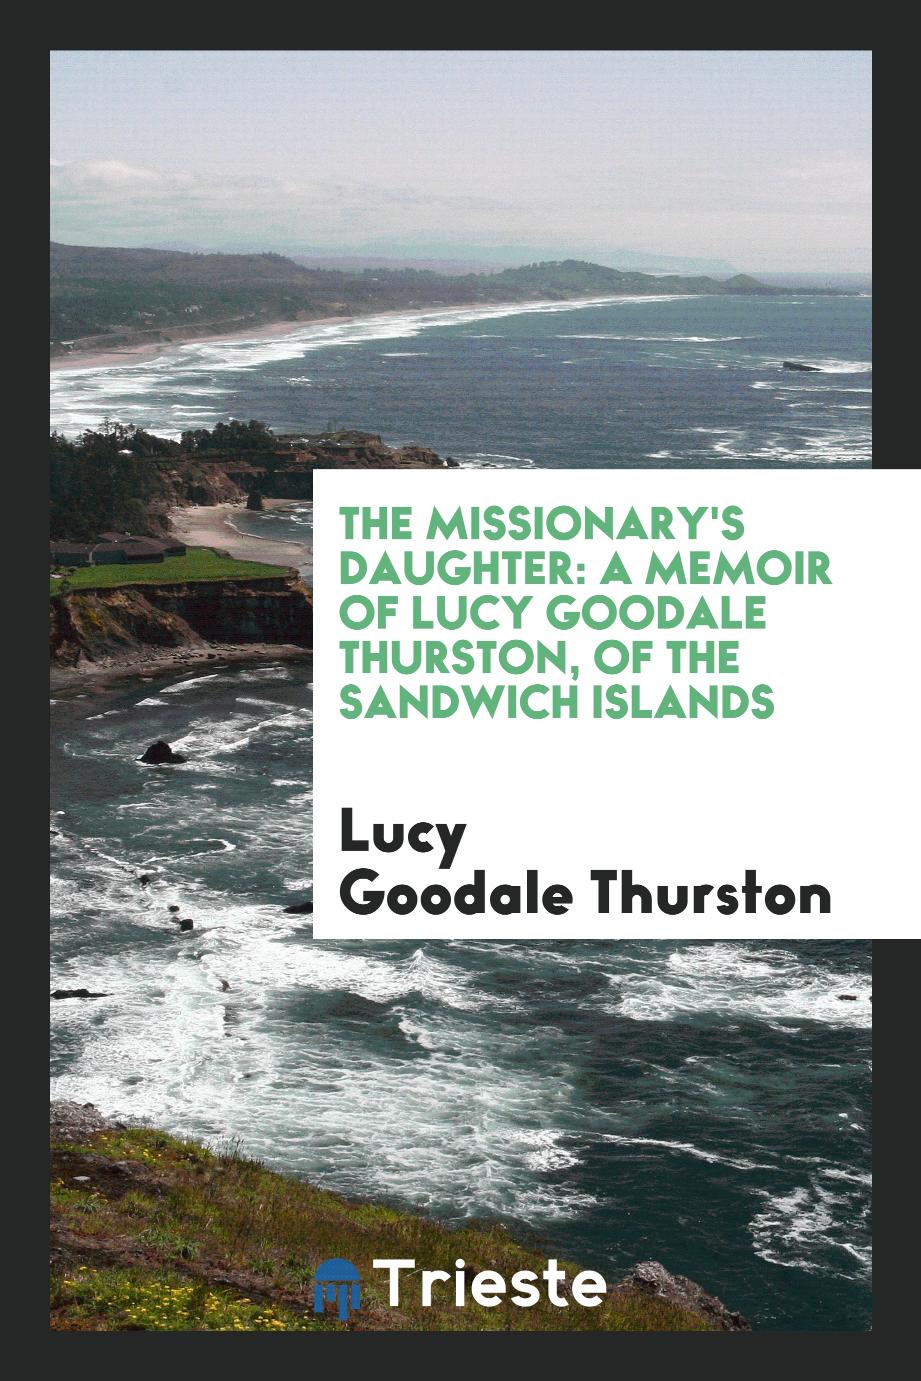 The missionary's daughter: a memoir of Lucy Goodale Thurston, of the Sandwich Islands